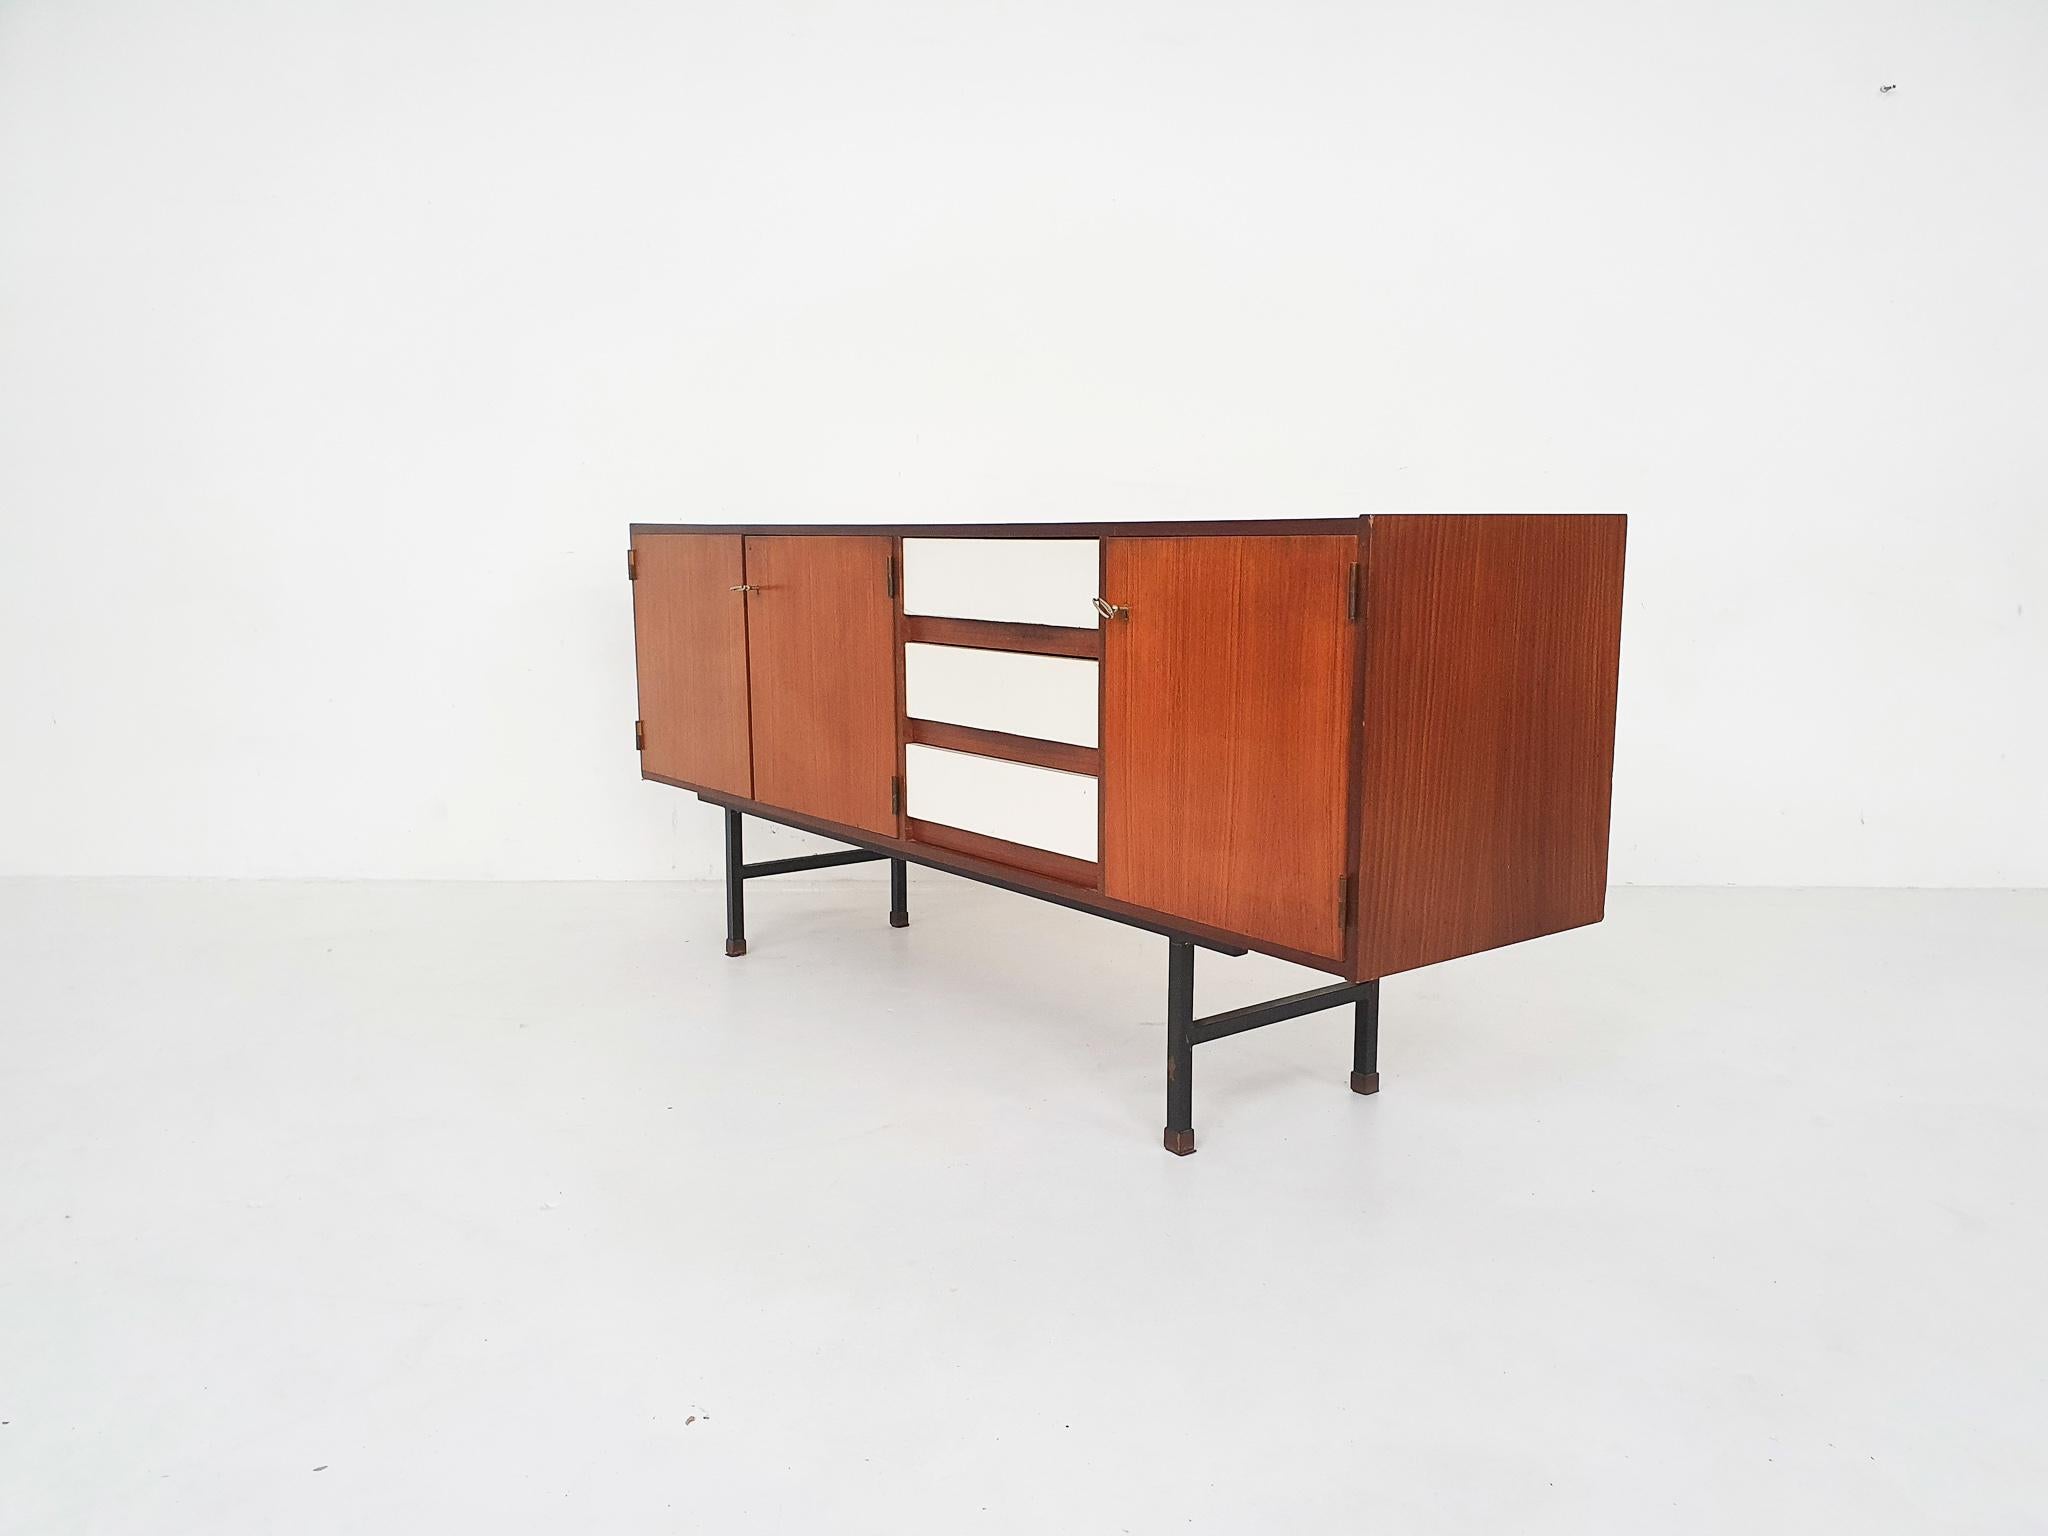 Metal Mid-Century Modern Sideboard / Credenza by Coja, the Netherlands, 1960s